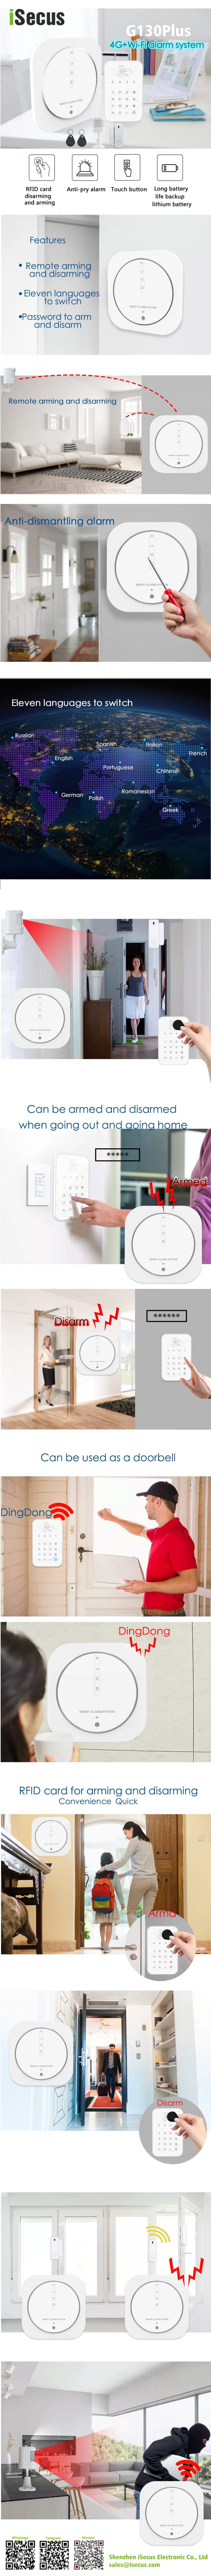 G130Plus 4G and WiFi Alarm System Kit-s